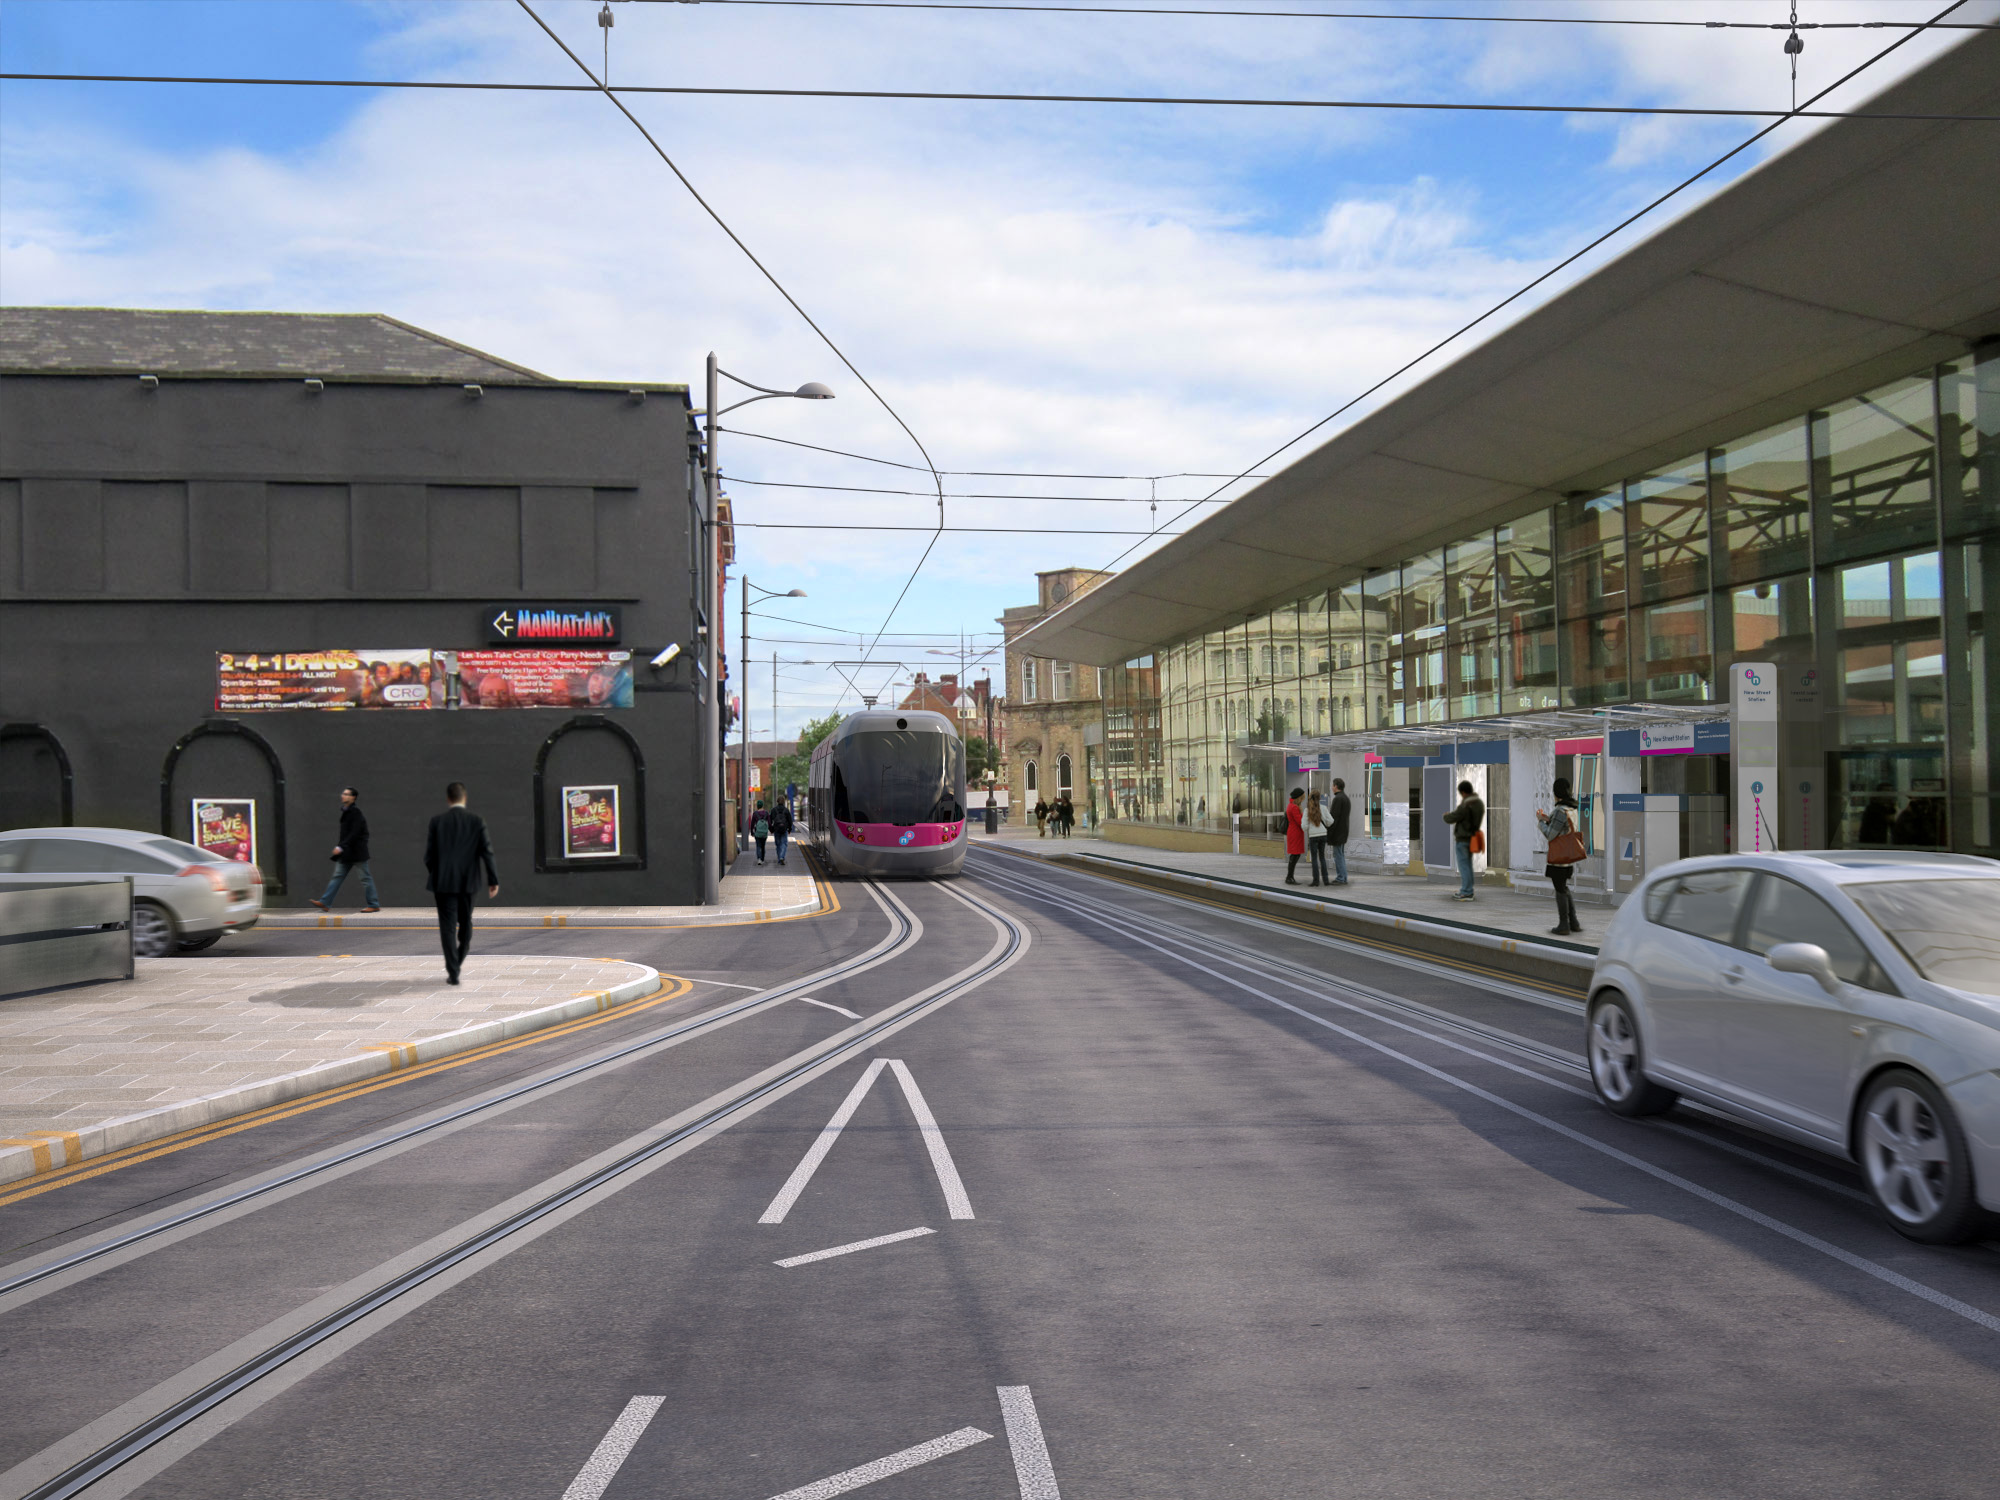 Plans to extend the Midland Metro in Wolverhampton were given the go-ahead today (Tuesday June 21), paving the way for the next stage in a wider £120 million redevelopment of the city centre.